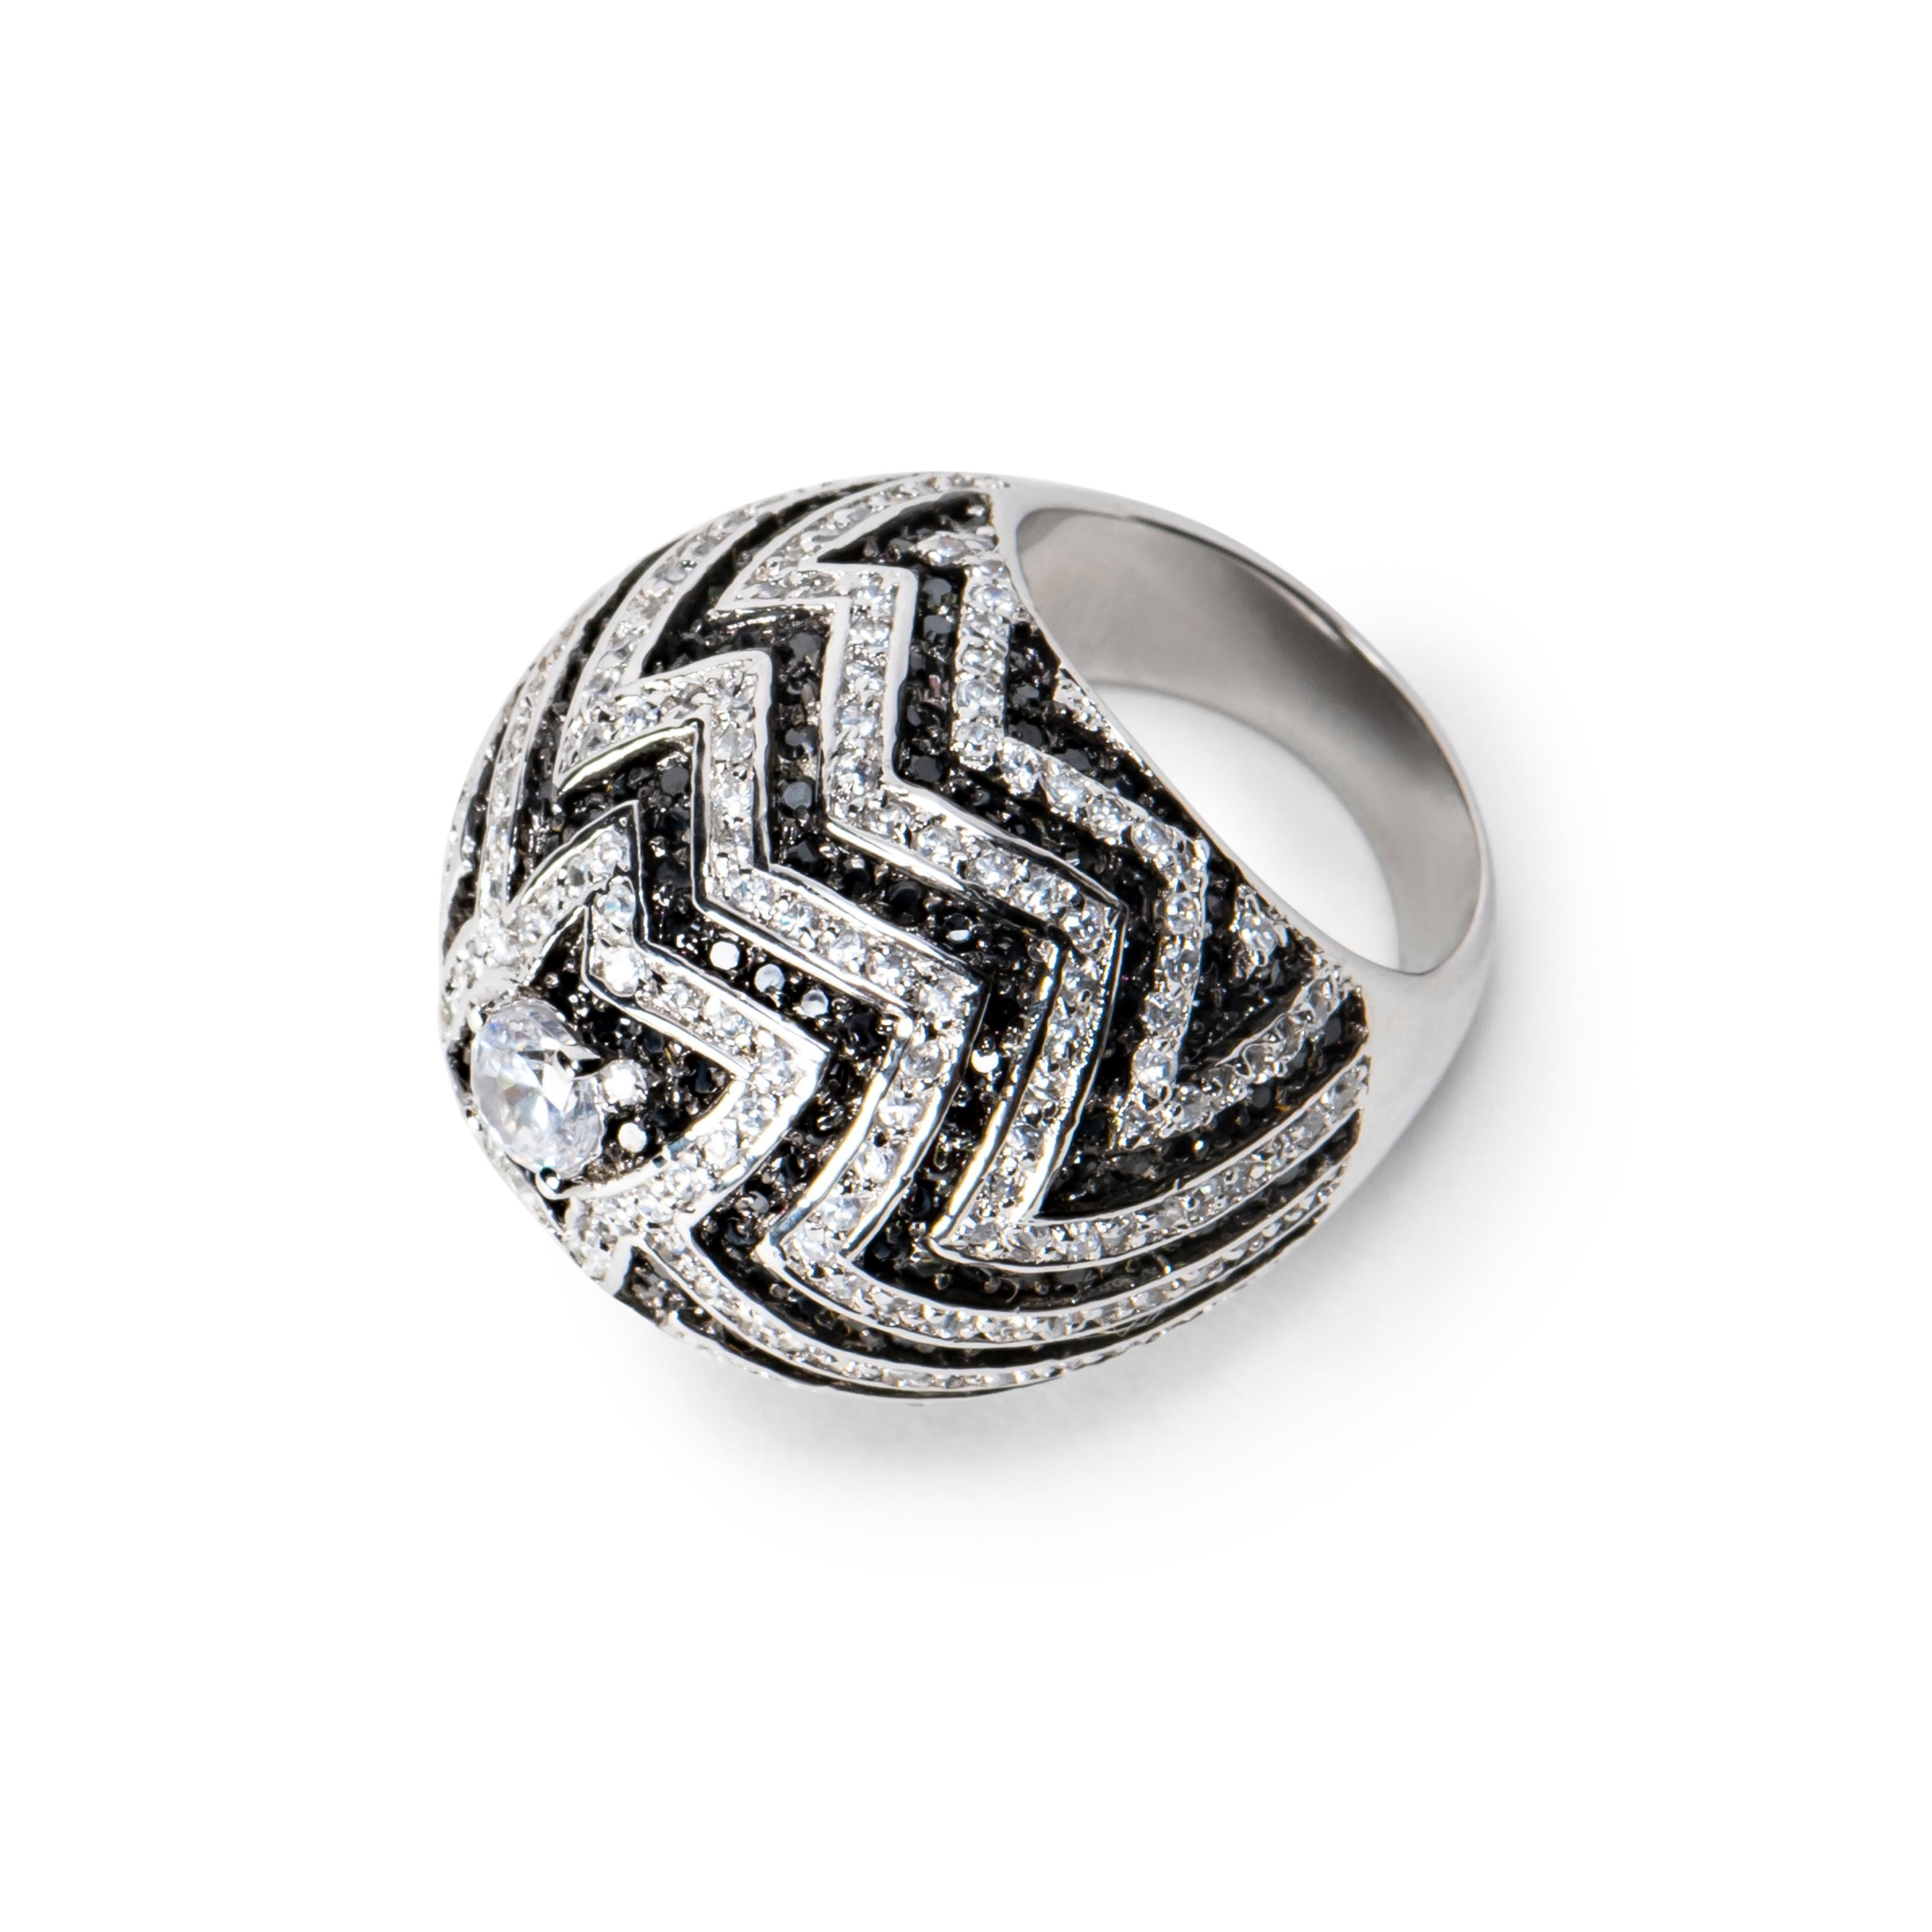 Brilliant Cut Miriam Salat Black and White 70s Inspired Art Deco Retro Cocktail Ring For Sale